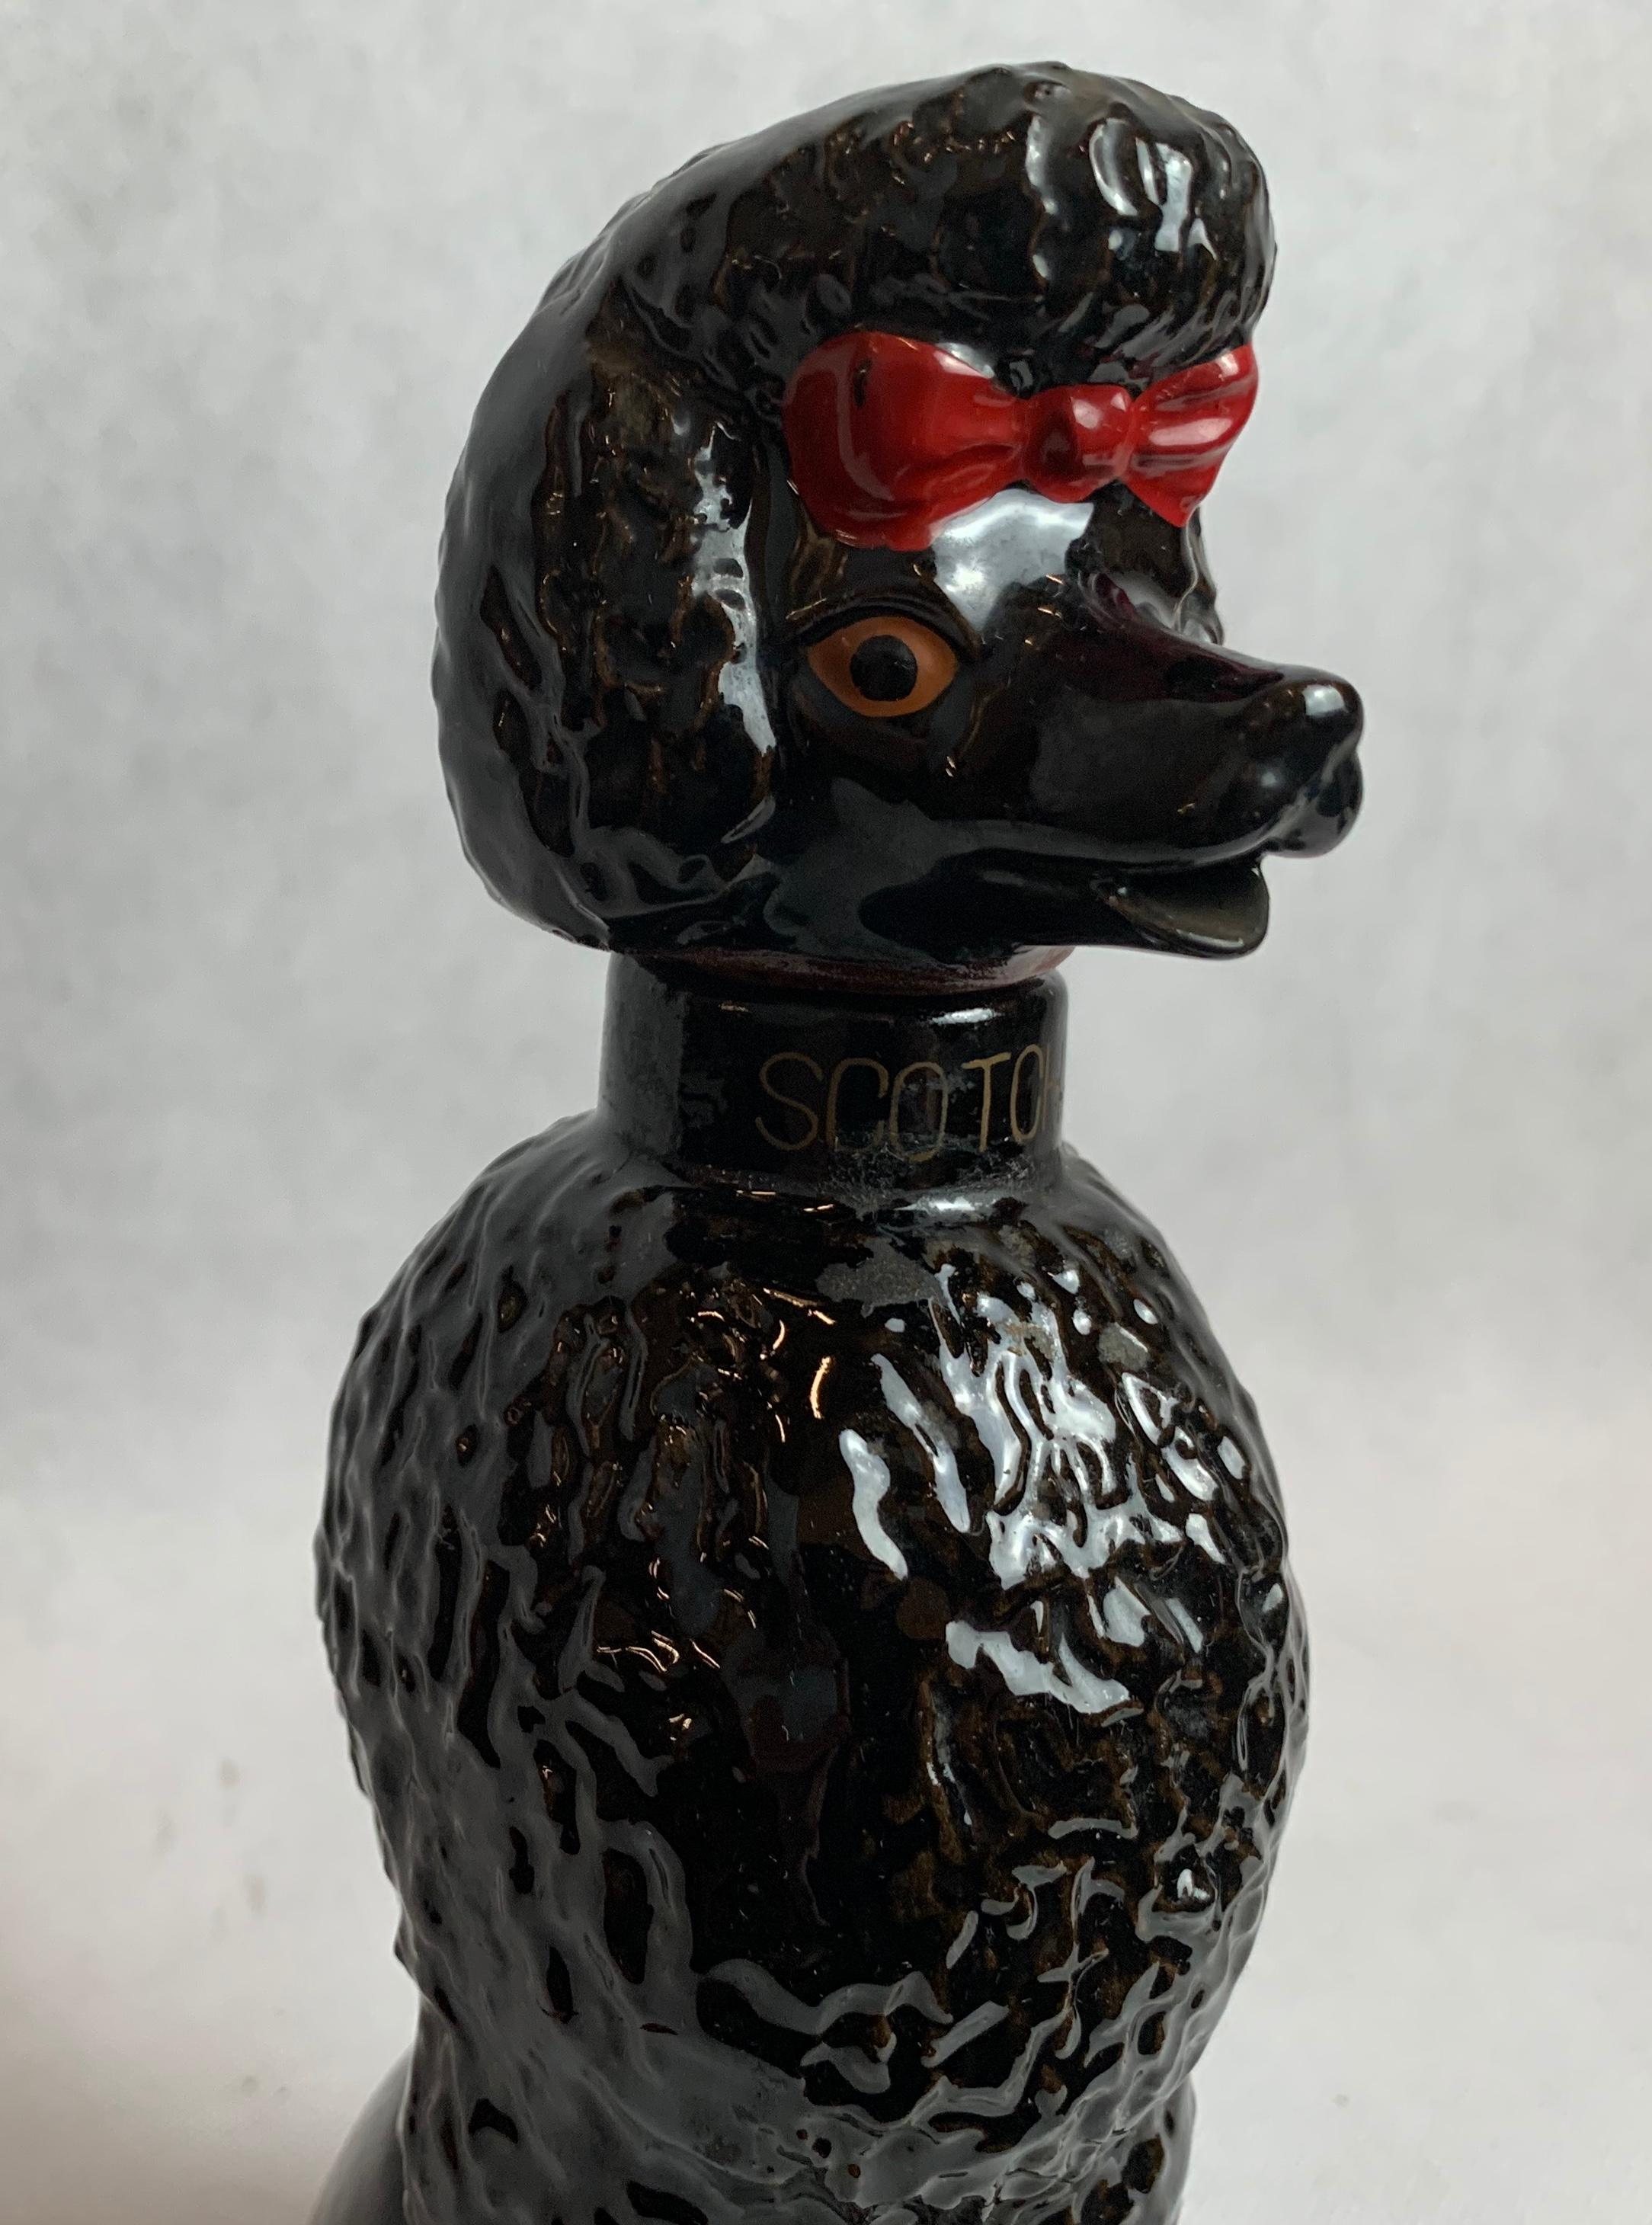 Glazed ceramic decanter marked Scotch in the form of an iconic 1950s Poodle with a smart Parisienne haircut set off with a bright red bow. When pouring Scotch it can be dispensed from the Poodles mouth. The collar is marked Scotch in gold